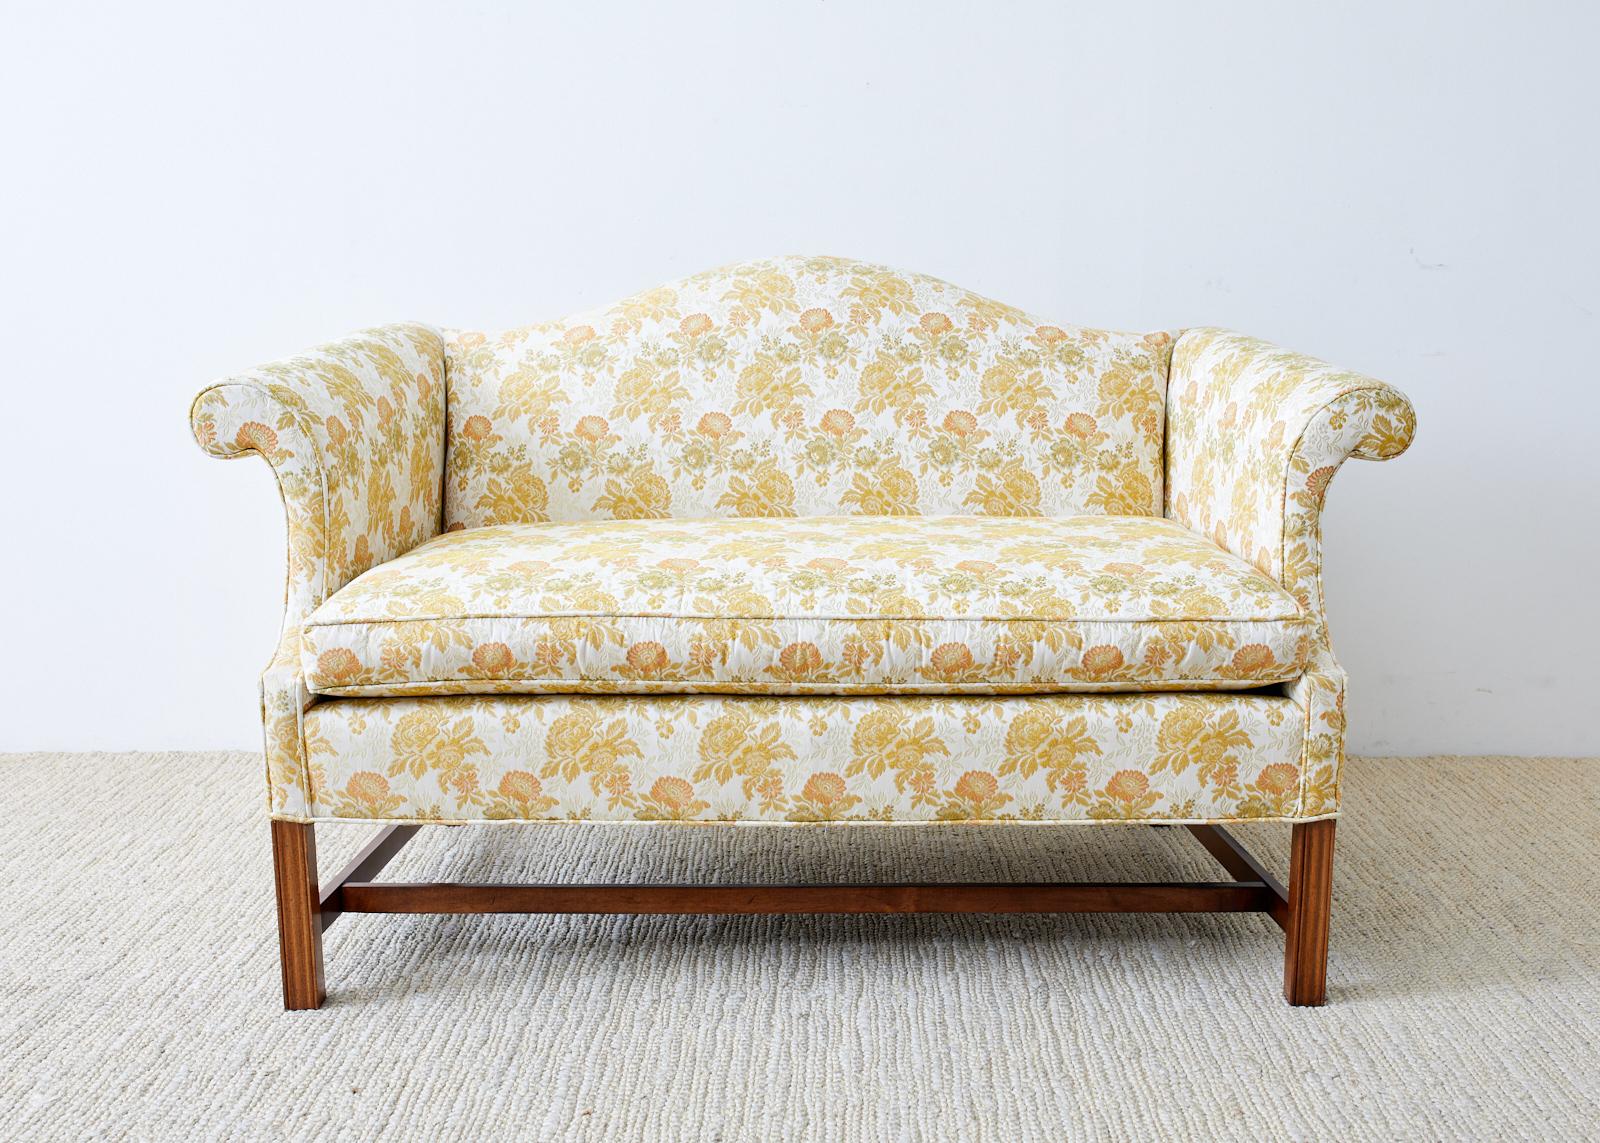 Charming English Georgian style settee or loveseat featuring a mahogany frame with a camelback hump form. The frame has a lovely thin arm that scrolls on each end giving the settee a classic profile. The seat has a thick, loose seat cushion that